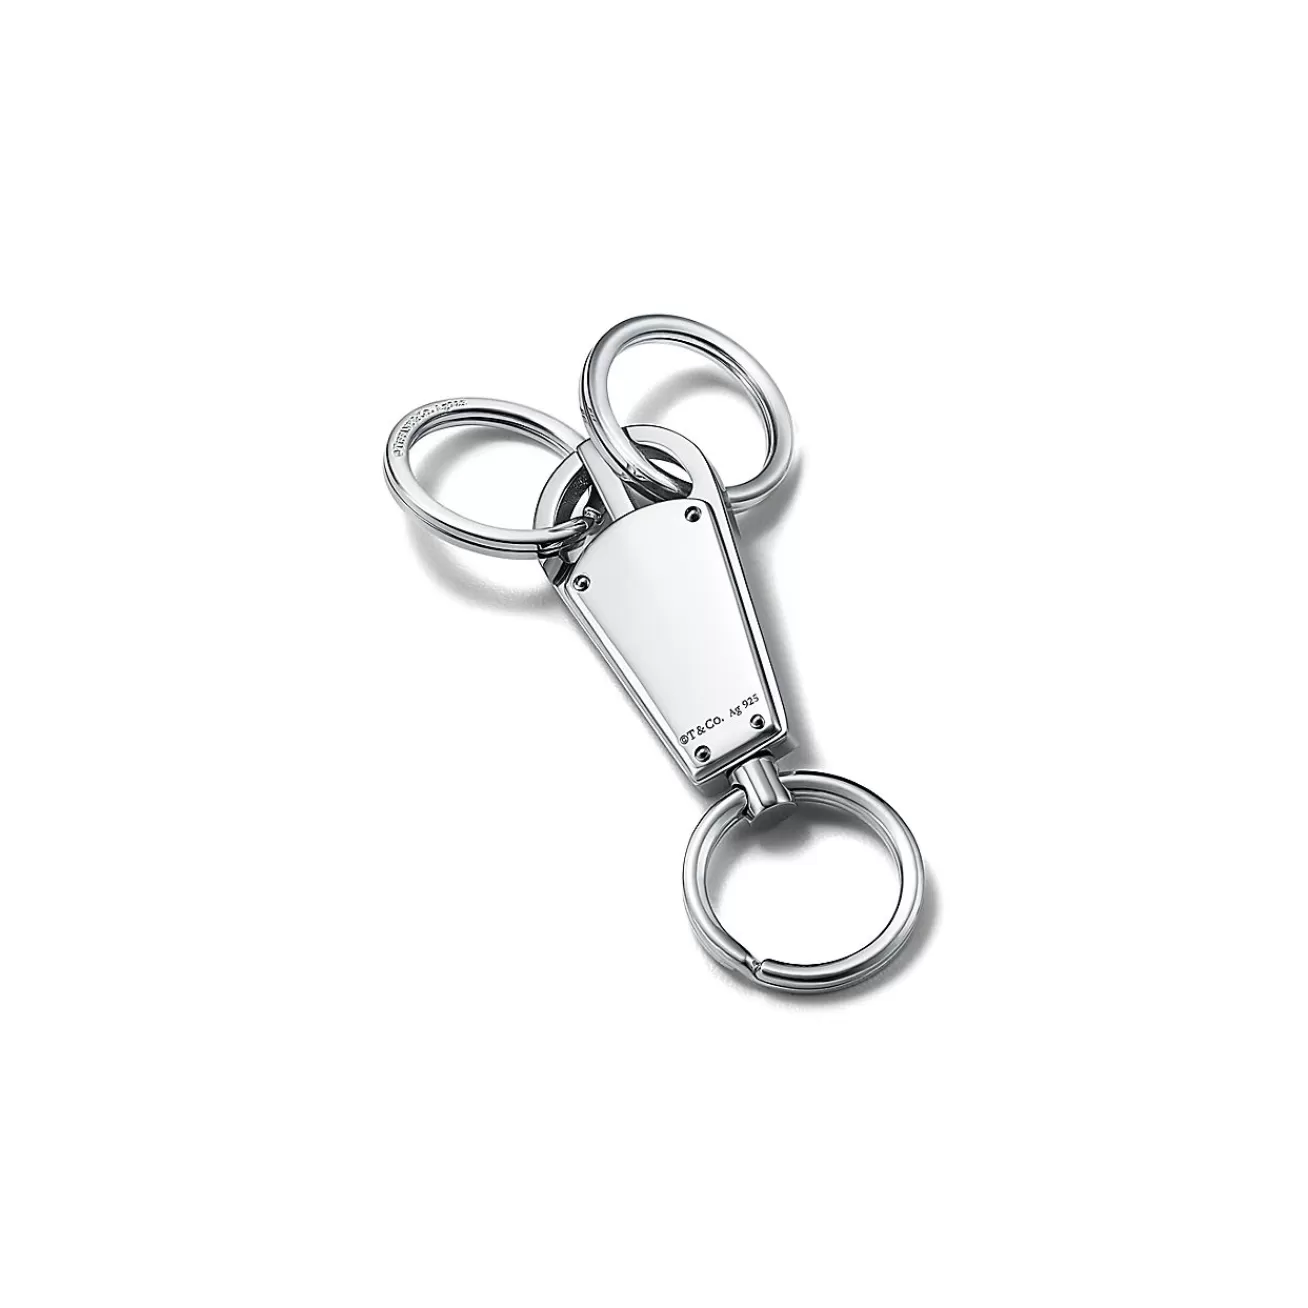 Tiffany & Co. Tiffany 1837 Makers valet key ring in sterling silver and stainless steel. | ^ Key Rings | Accessories